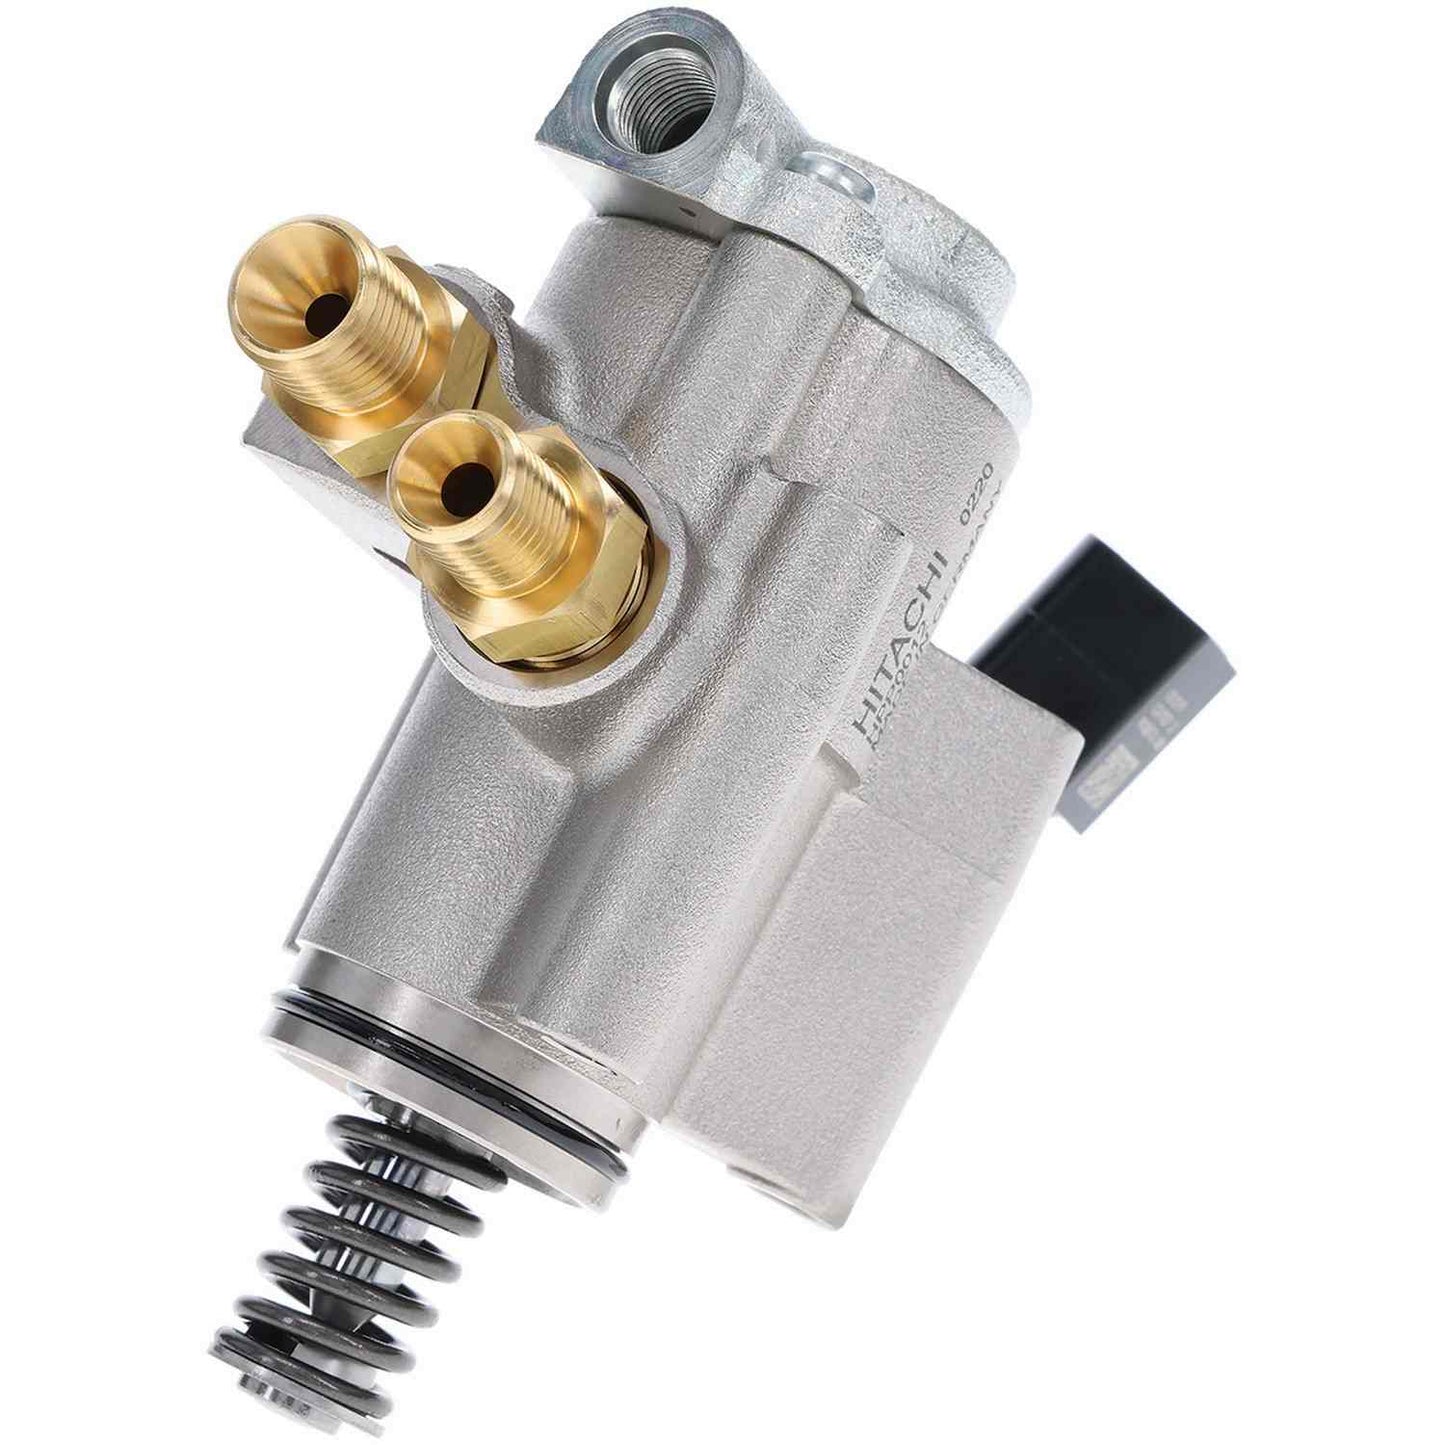 Right View of Direct Injection High Pressure Fuel Pump HITACHI HPP0012